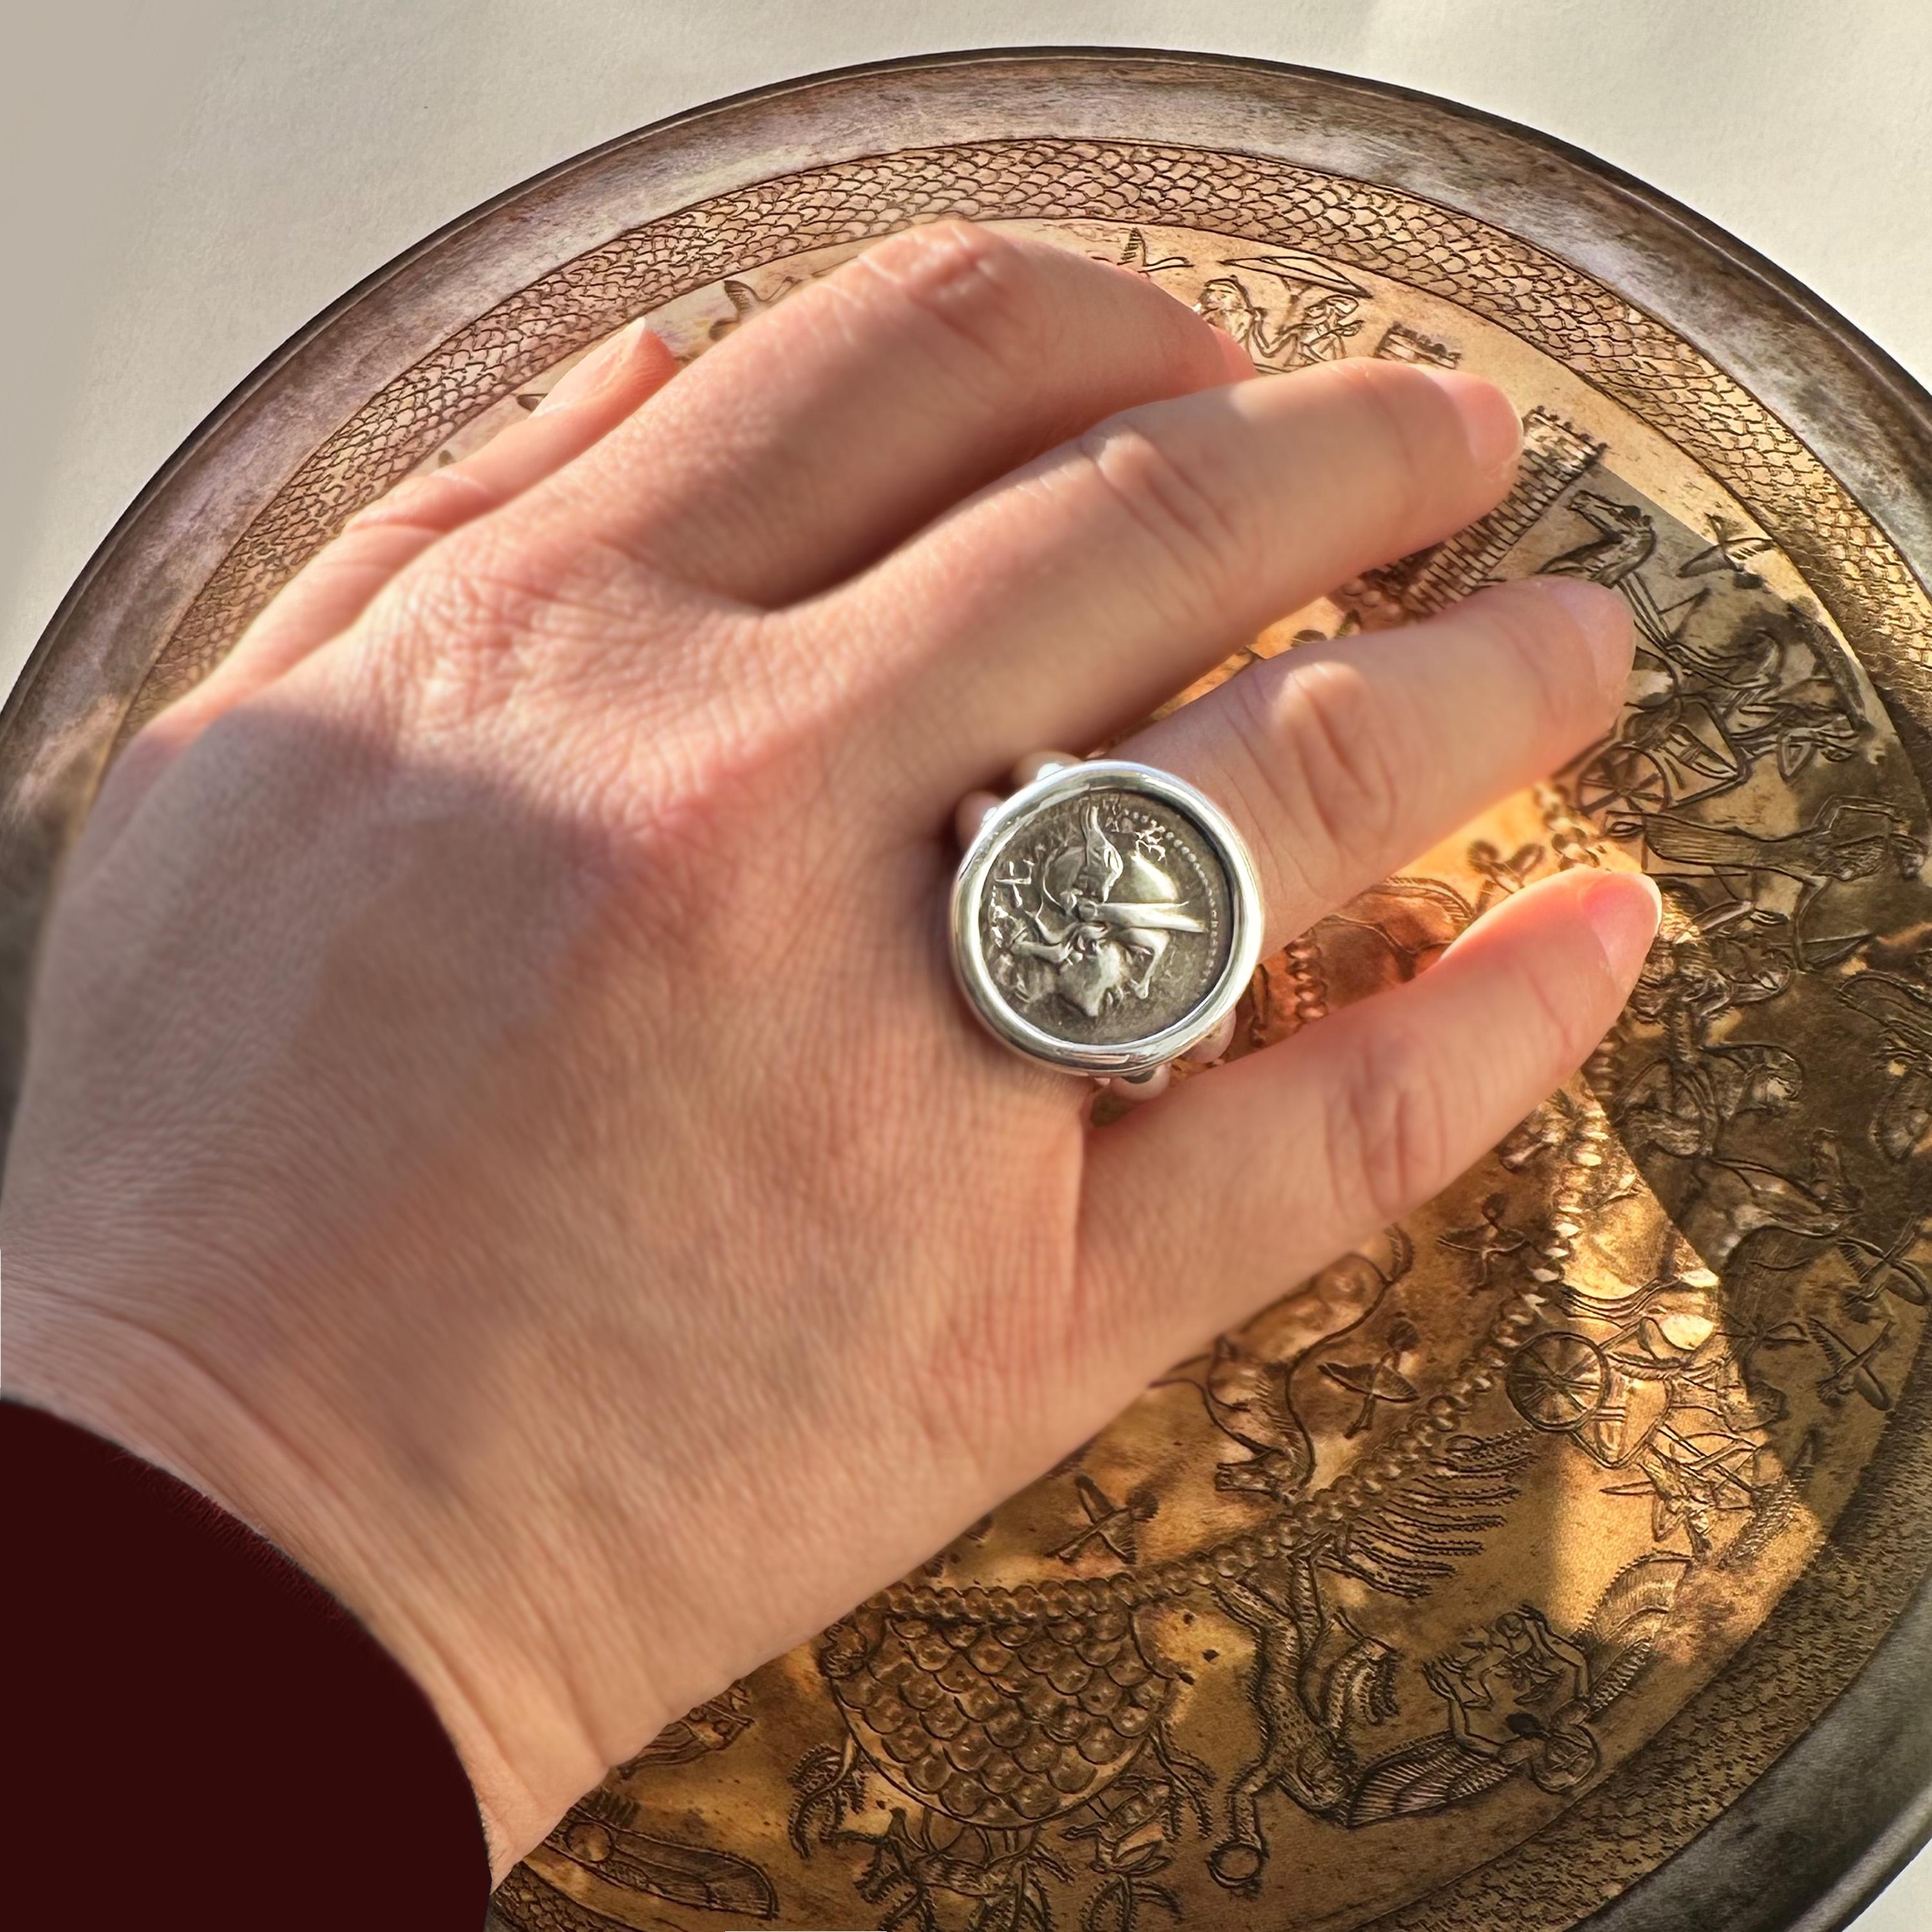 This stunning 18 kt gold ring showcases an authentic silver Roman coin, specifically a sestertius from 211 BC, featuring a depiction of the Goddess Rome. Meticulously crafted, this ring is a testament to artistic skill and attention to detail. The